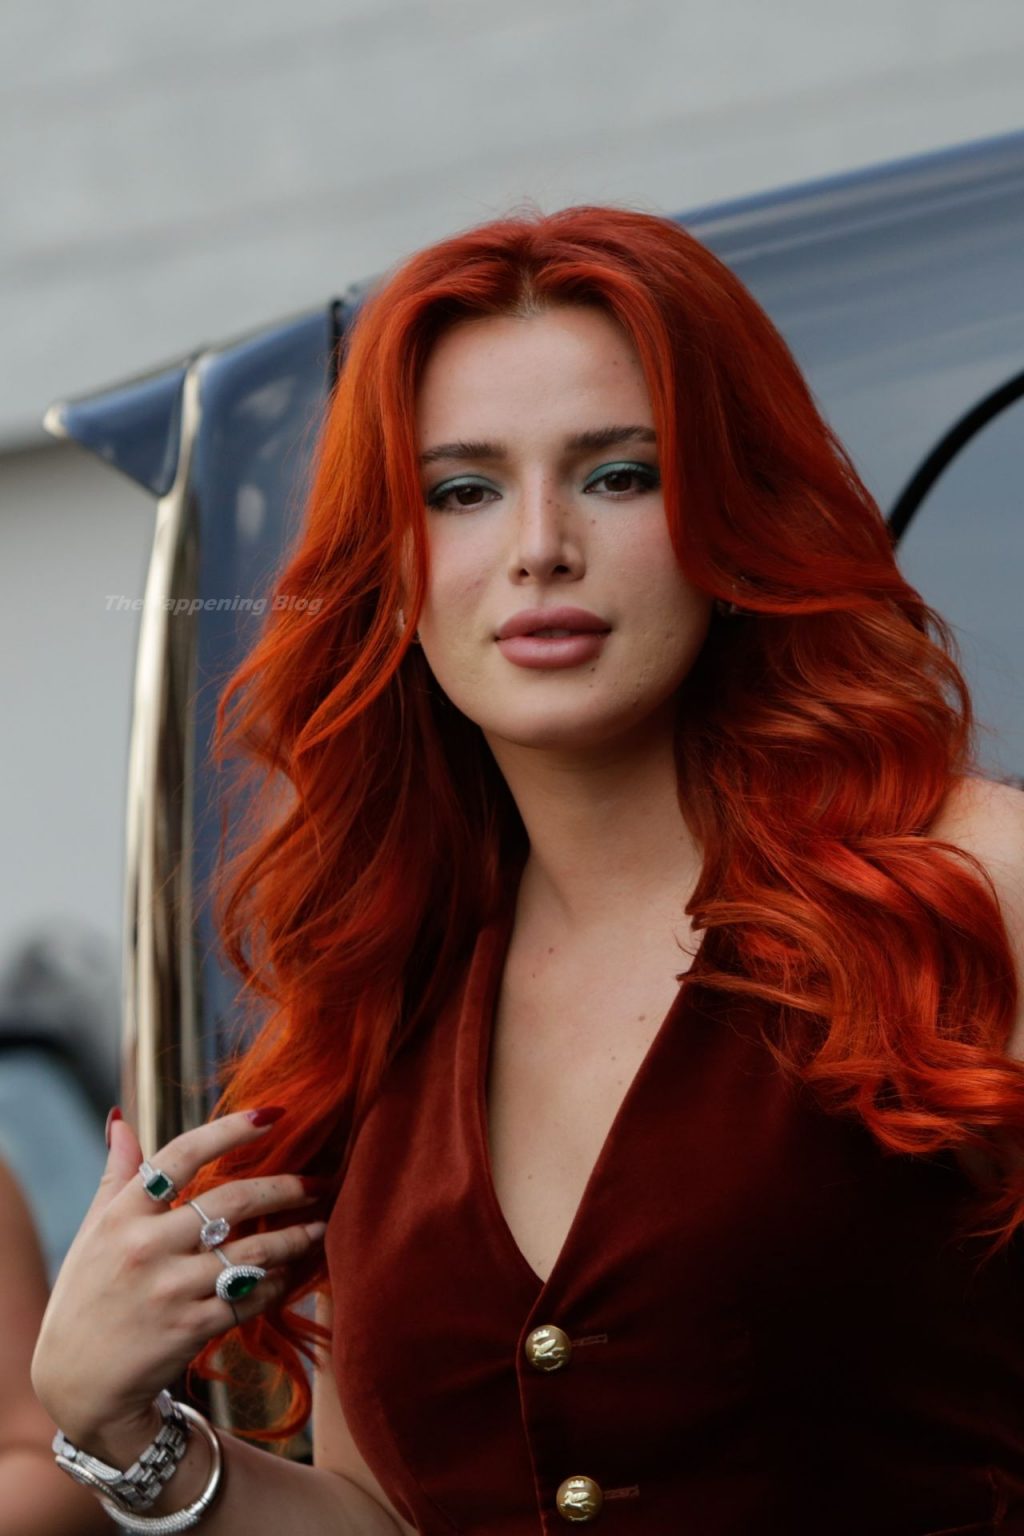 Bella Thorne and Benji are Seen at Milan Fashion Week (68 Photos) [Updated]